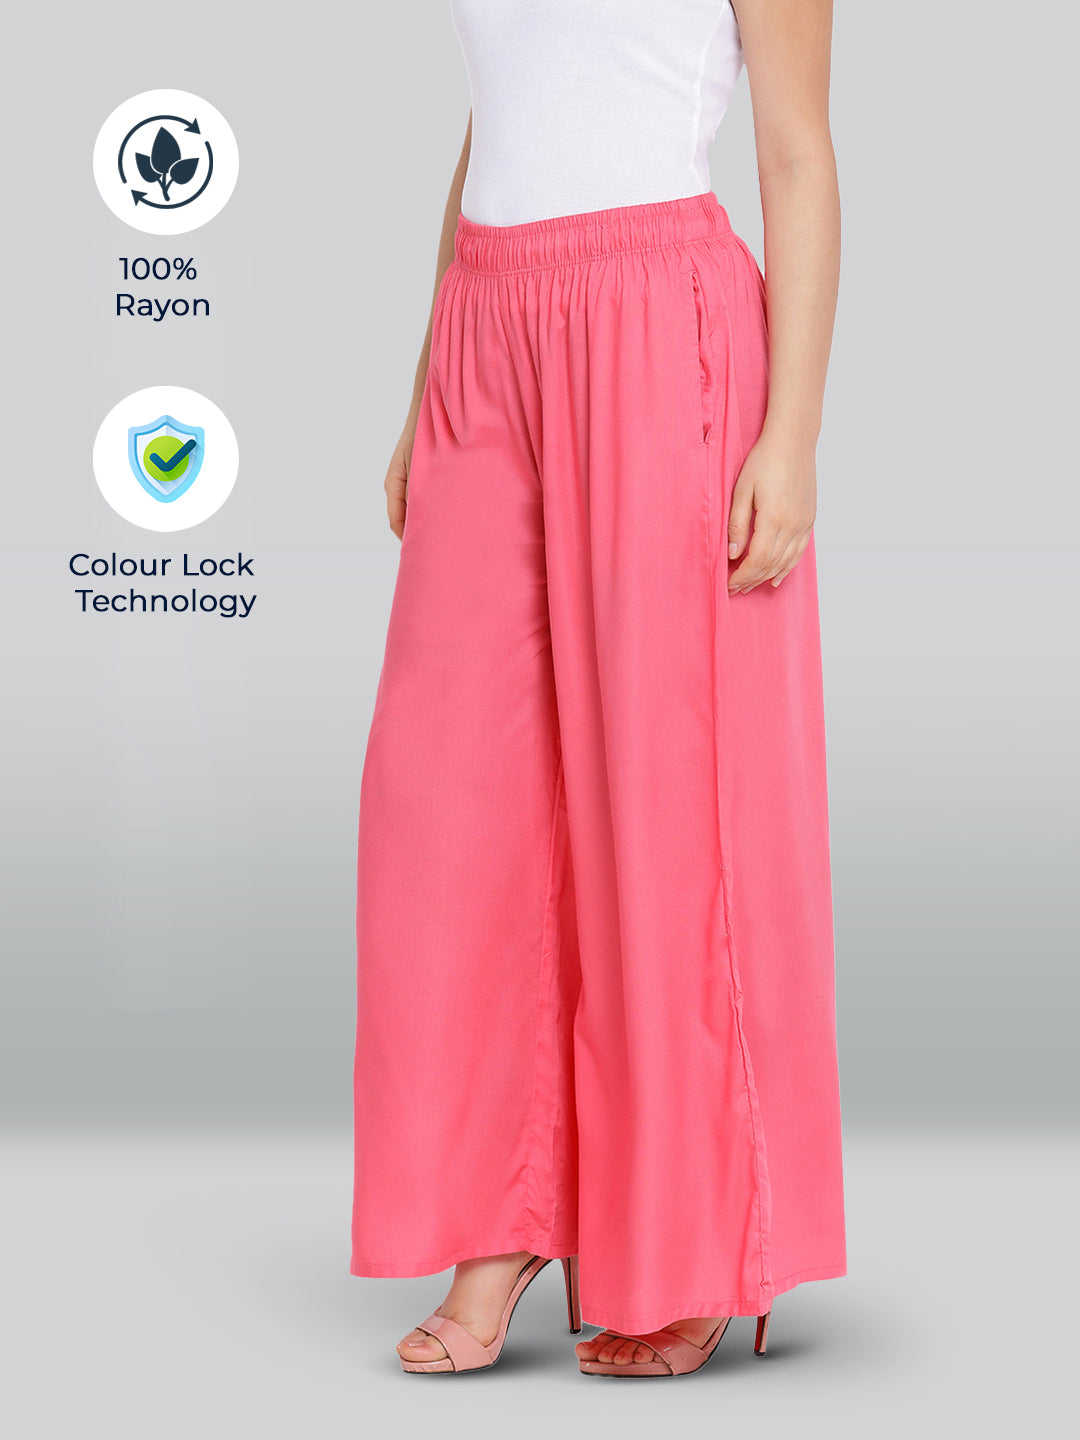 Buy Baby Pink Palazzo Pant Cotton for Best Price, Reviews, Free Shipping